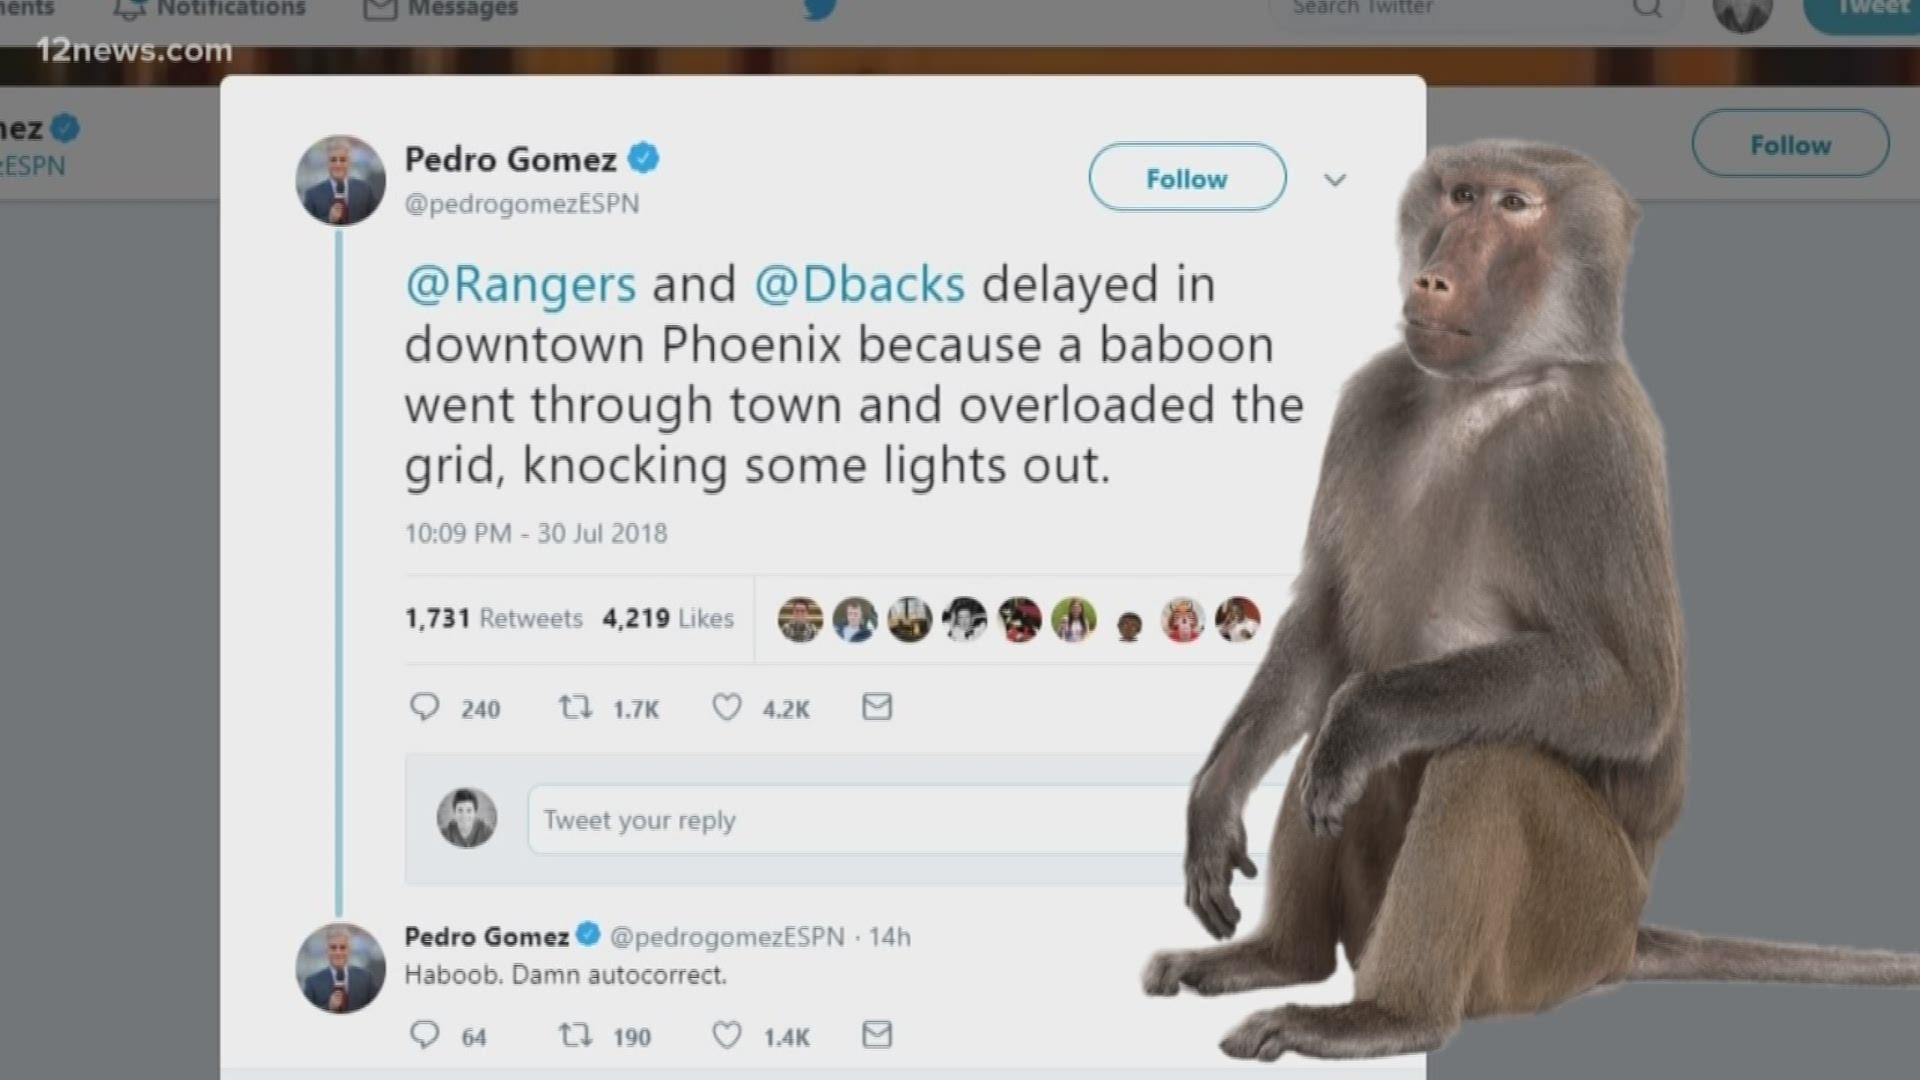 Pedro Gomez tweeted that a baboon was causing a delay to the Diamondbacks game when he meant a to tweet that a haboob was causing the delay. We play Baboon vs Haboob with him to see if he knows the difference.